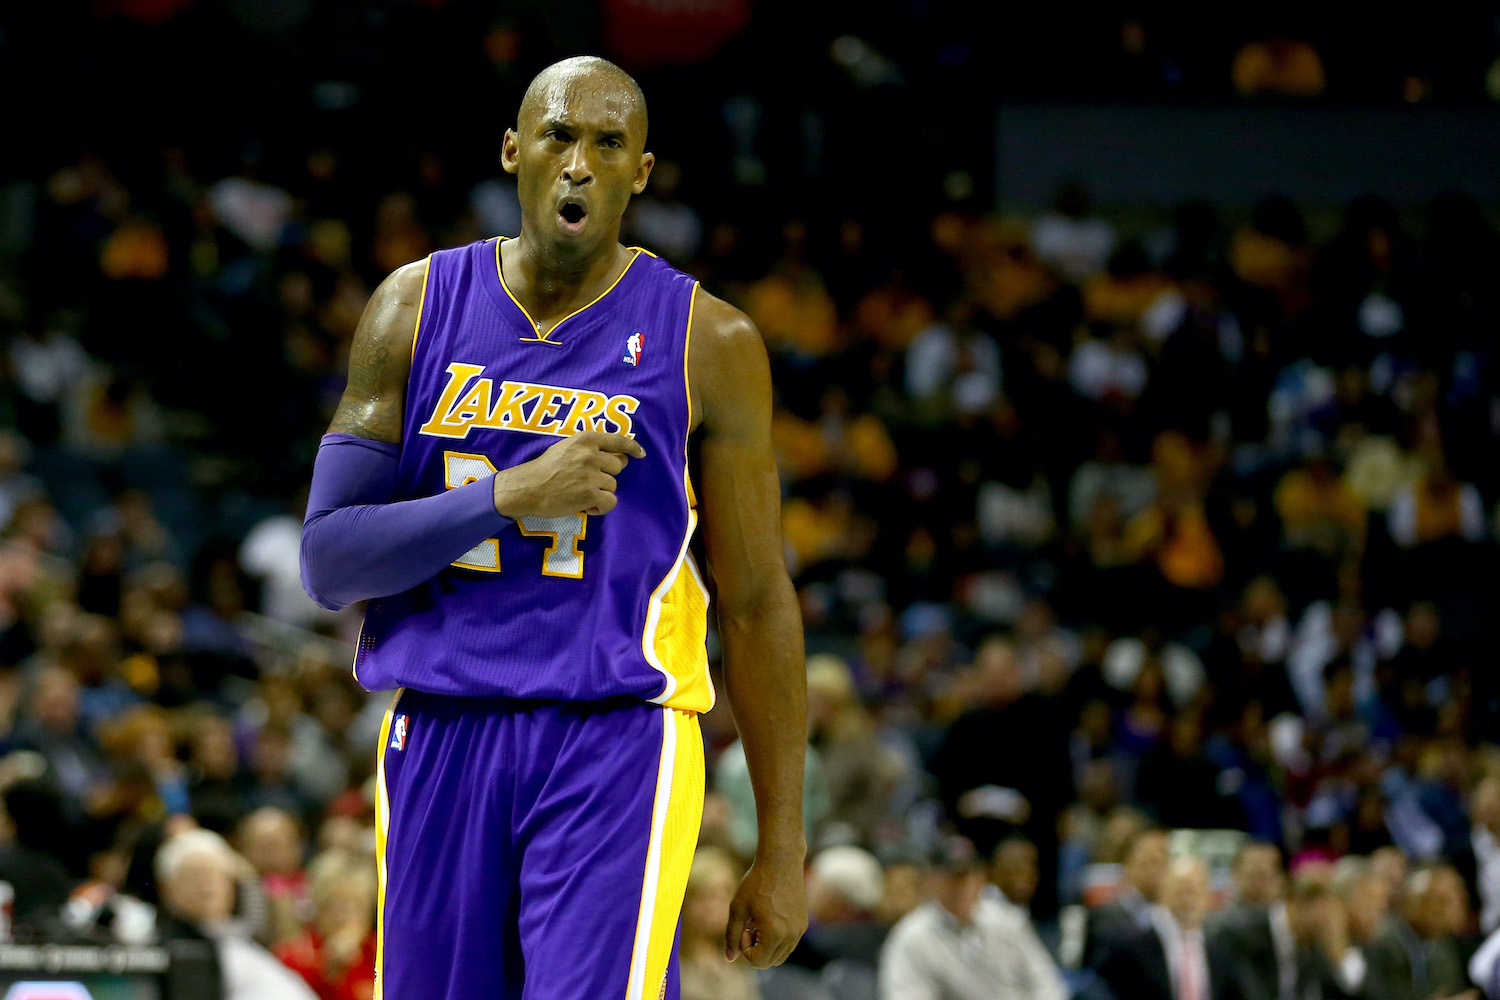 Kobe Bryant reacts on the court during the 2013-14 NBA season.